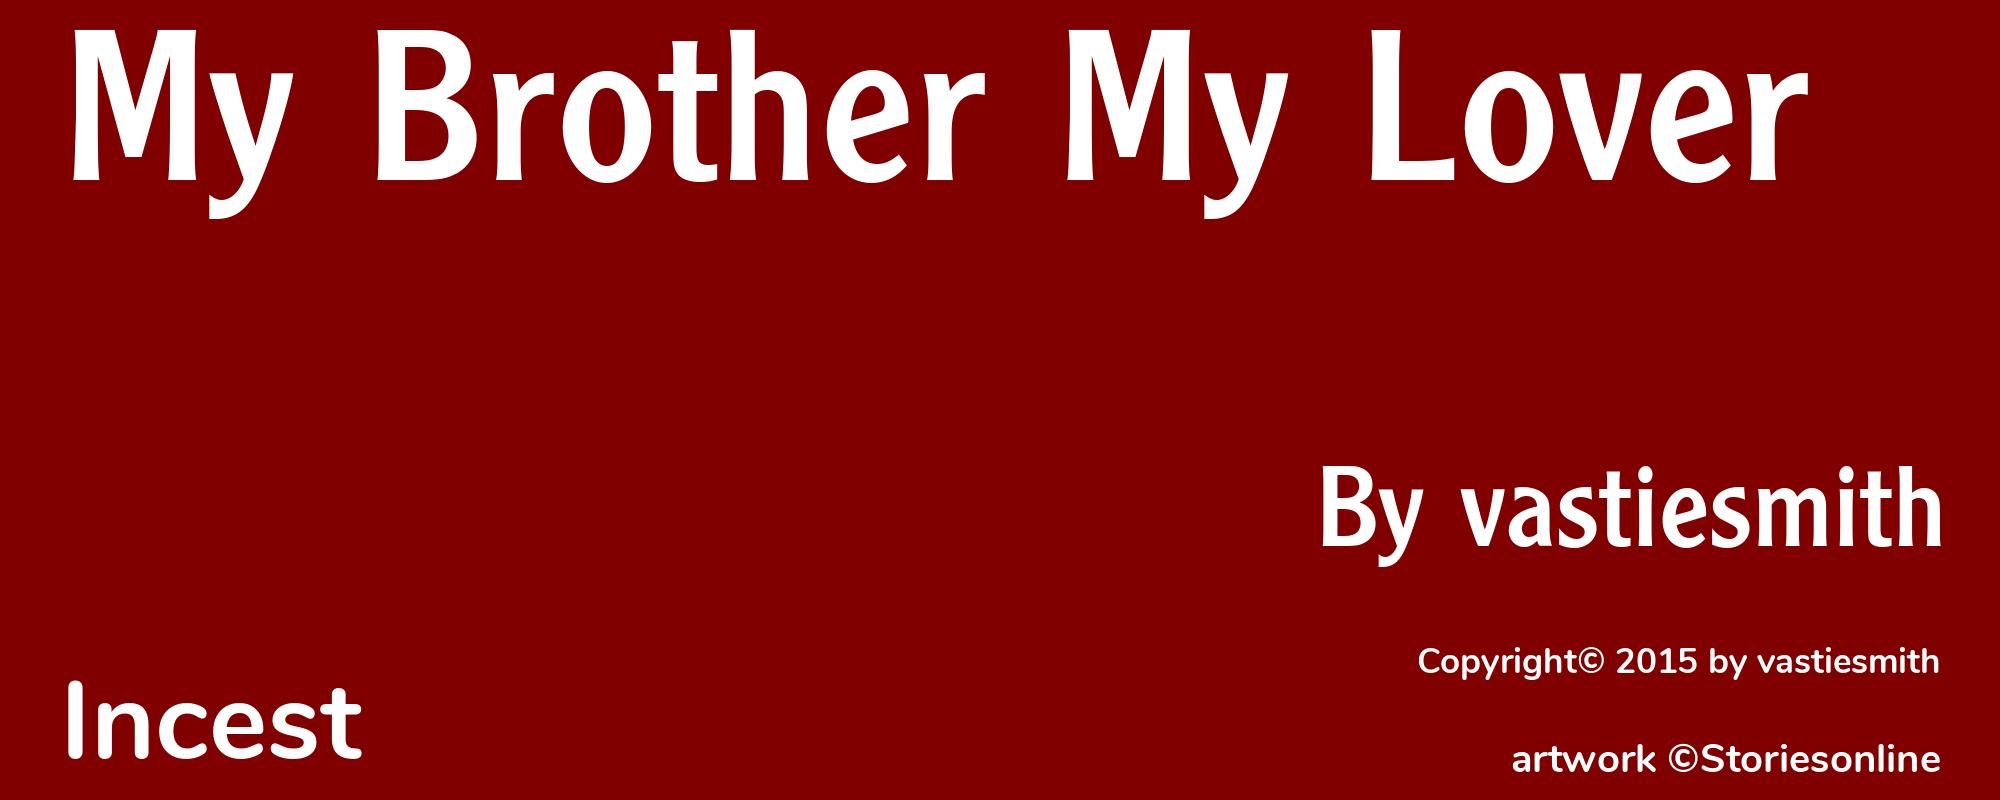 My Brother My Lover - Cover